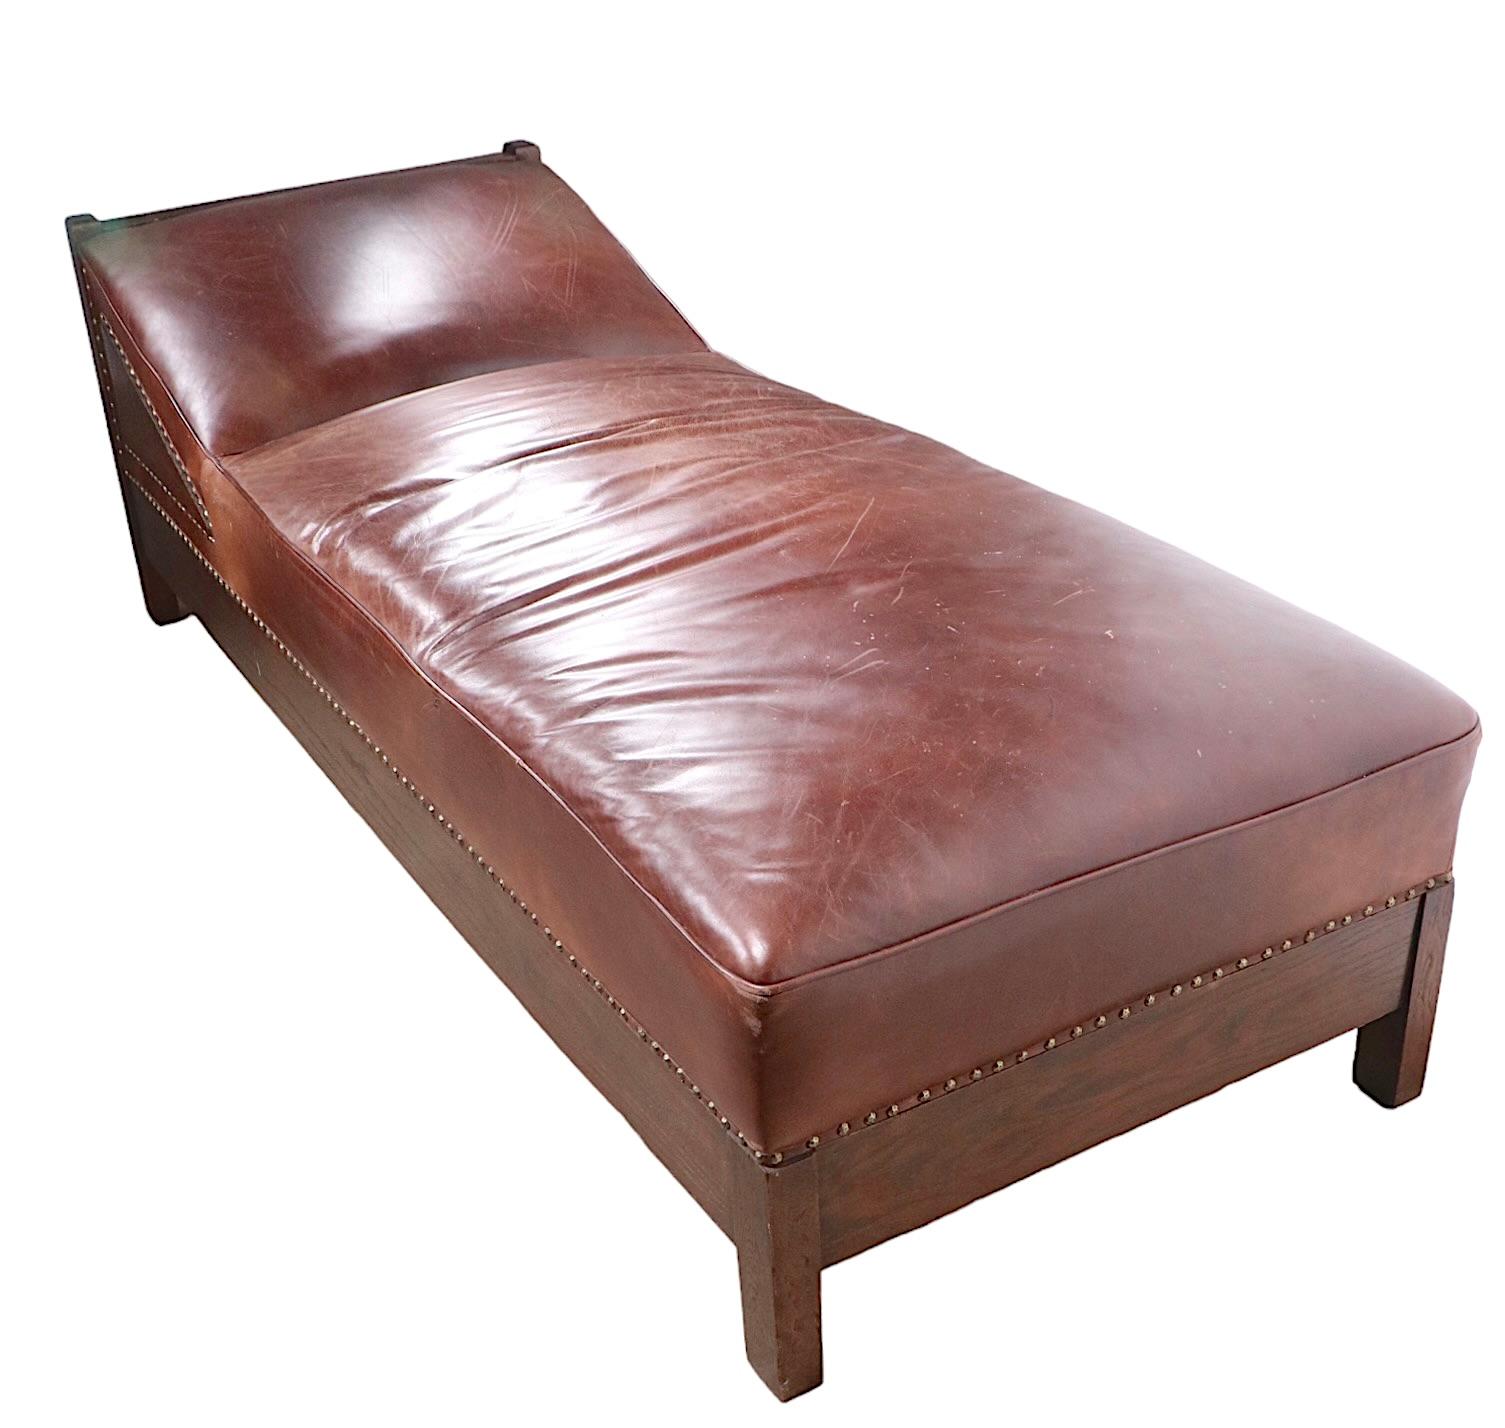 Oak and Leather Arts and Crafts Mission Daybed Chaise Lounge c. 1900 -1920's 8